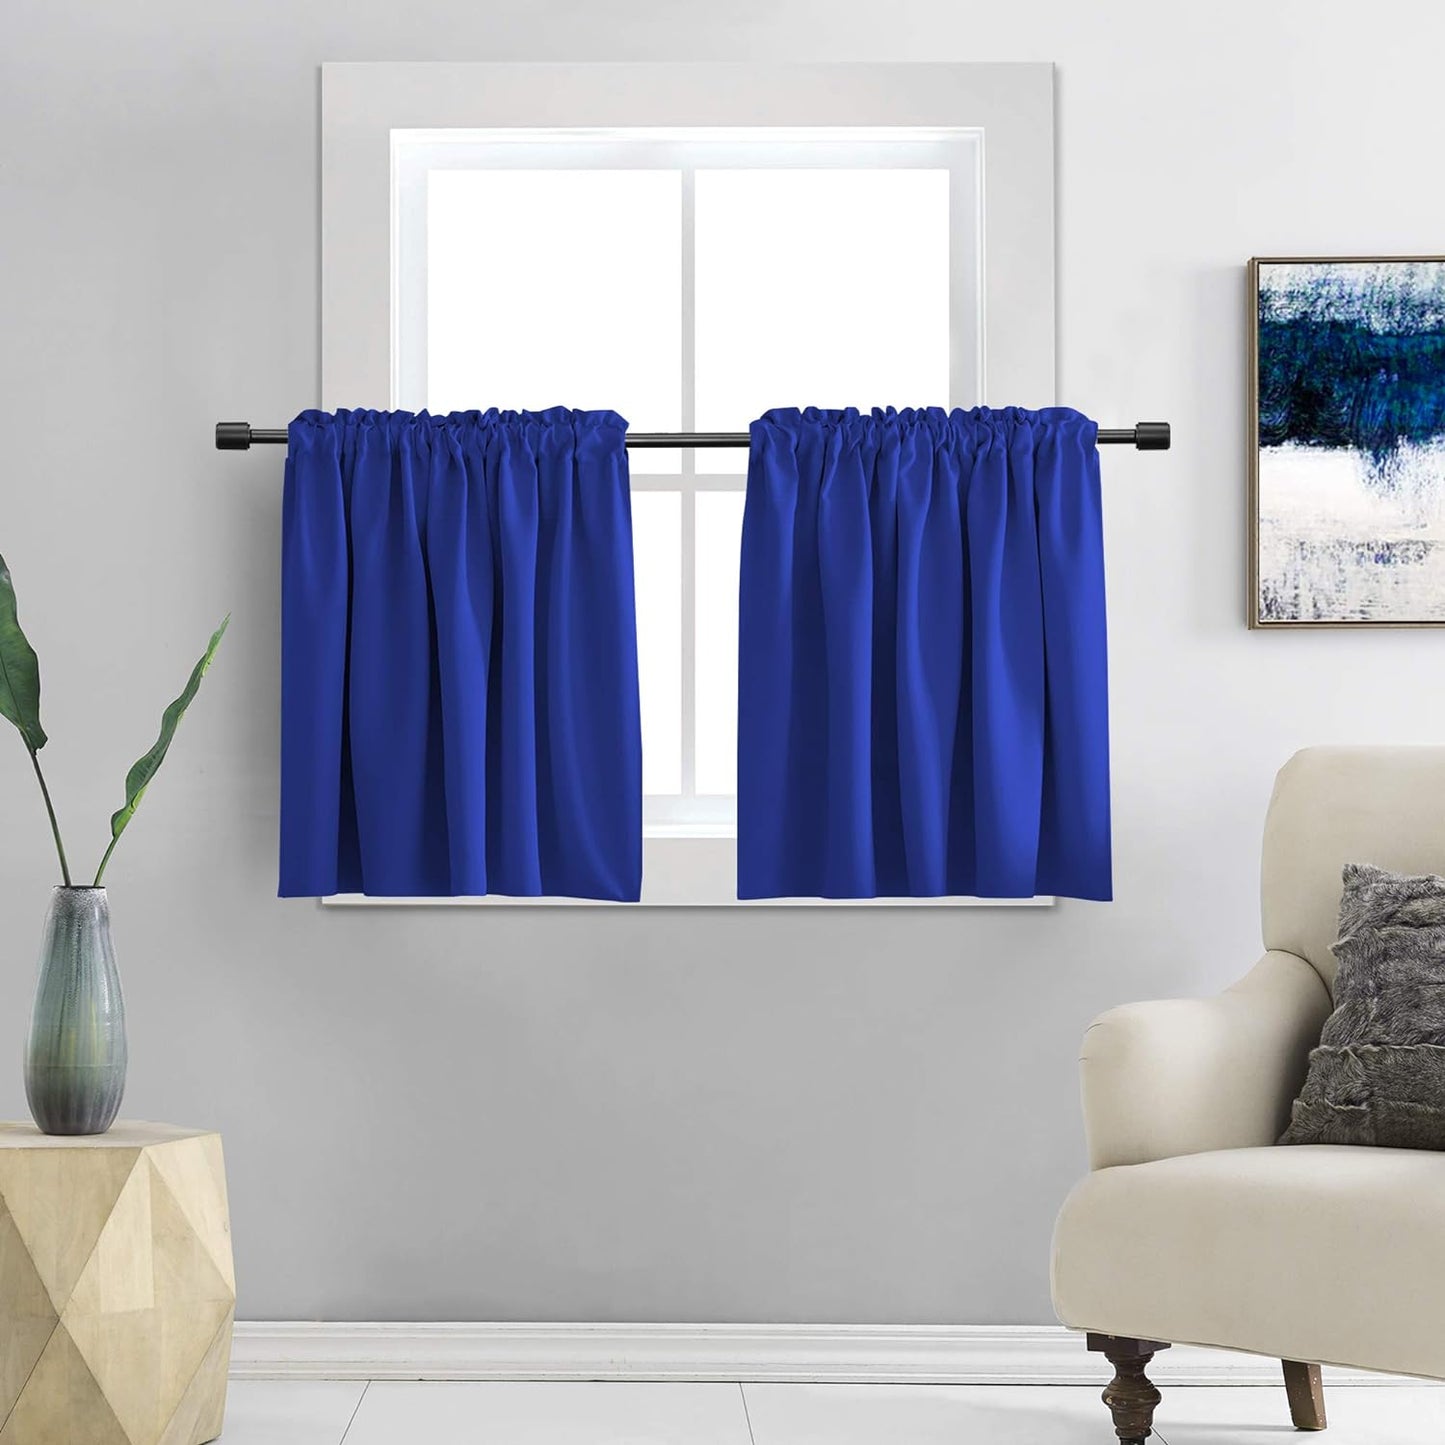 DONREN 24 Inch Length Curtains- 2 Panels Blackout Thermal Insulating Small Curtain Tiers for Bathroom with Rod Pocket (Black,42 Inch Width)  DONREN Royal Blue 42" X 24" 